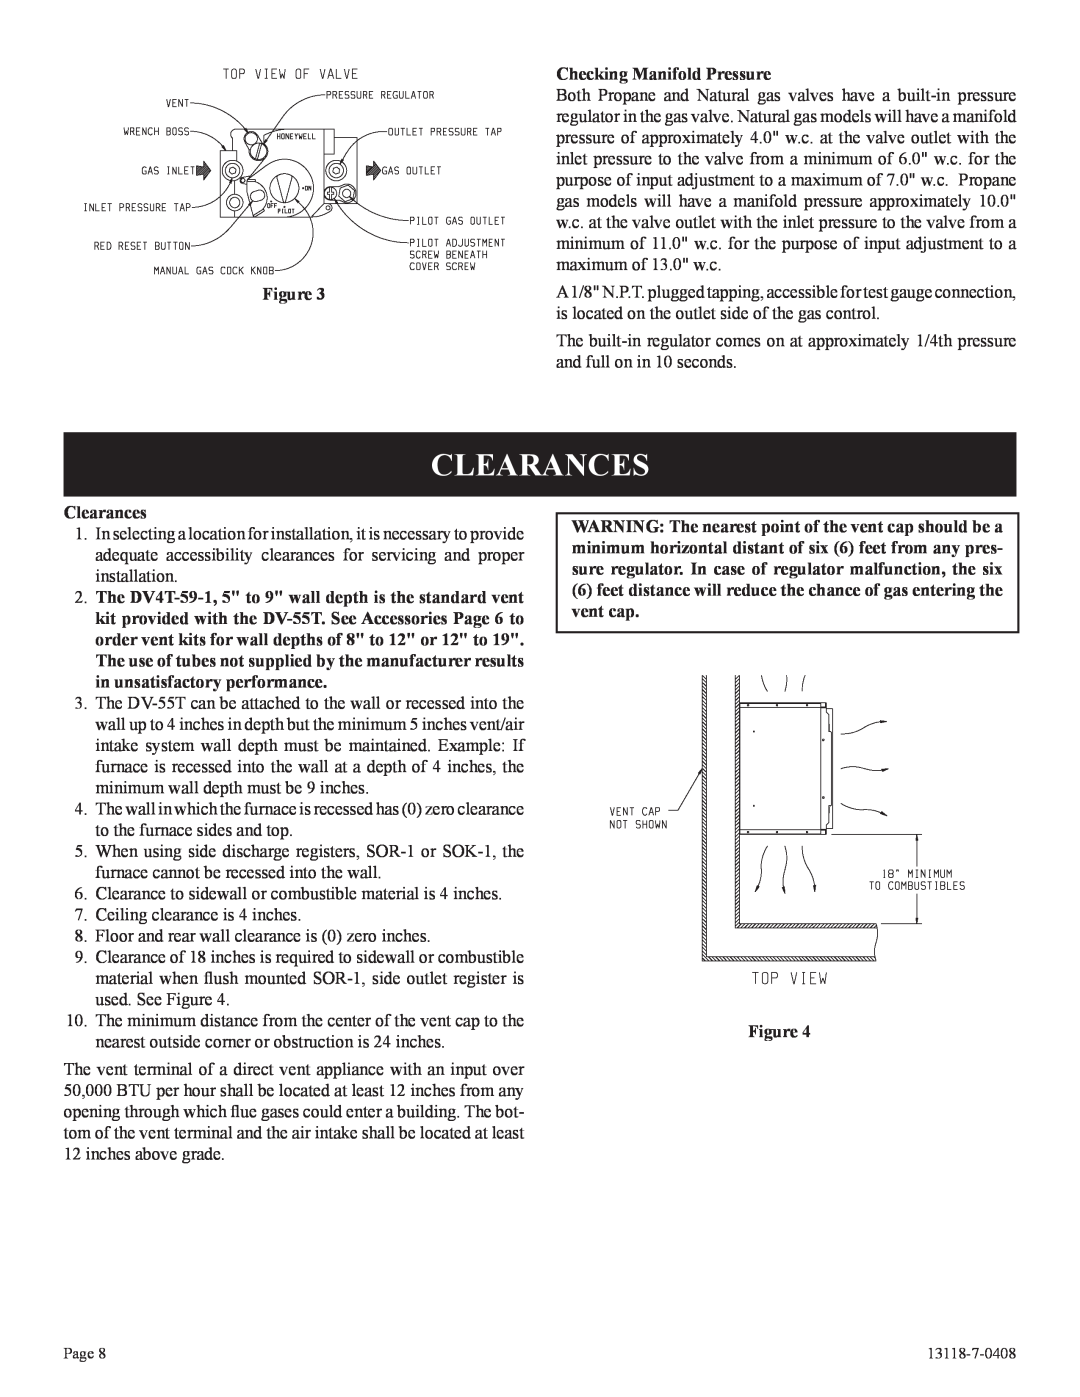 Empire Comfort Systems DV-55T-1 installation instructions Clearances, Checking Manifold Pressure, Figure 